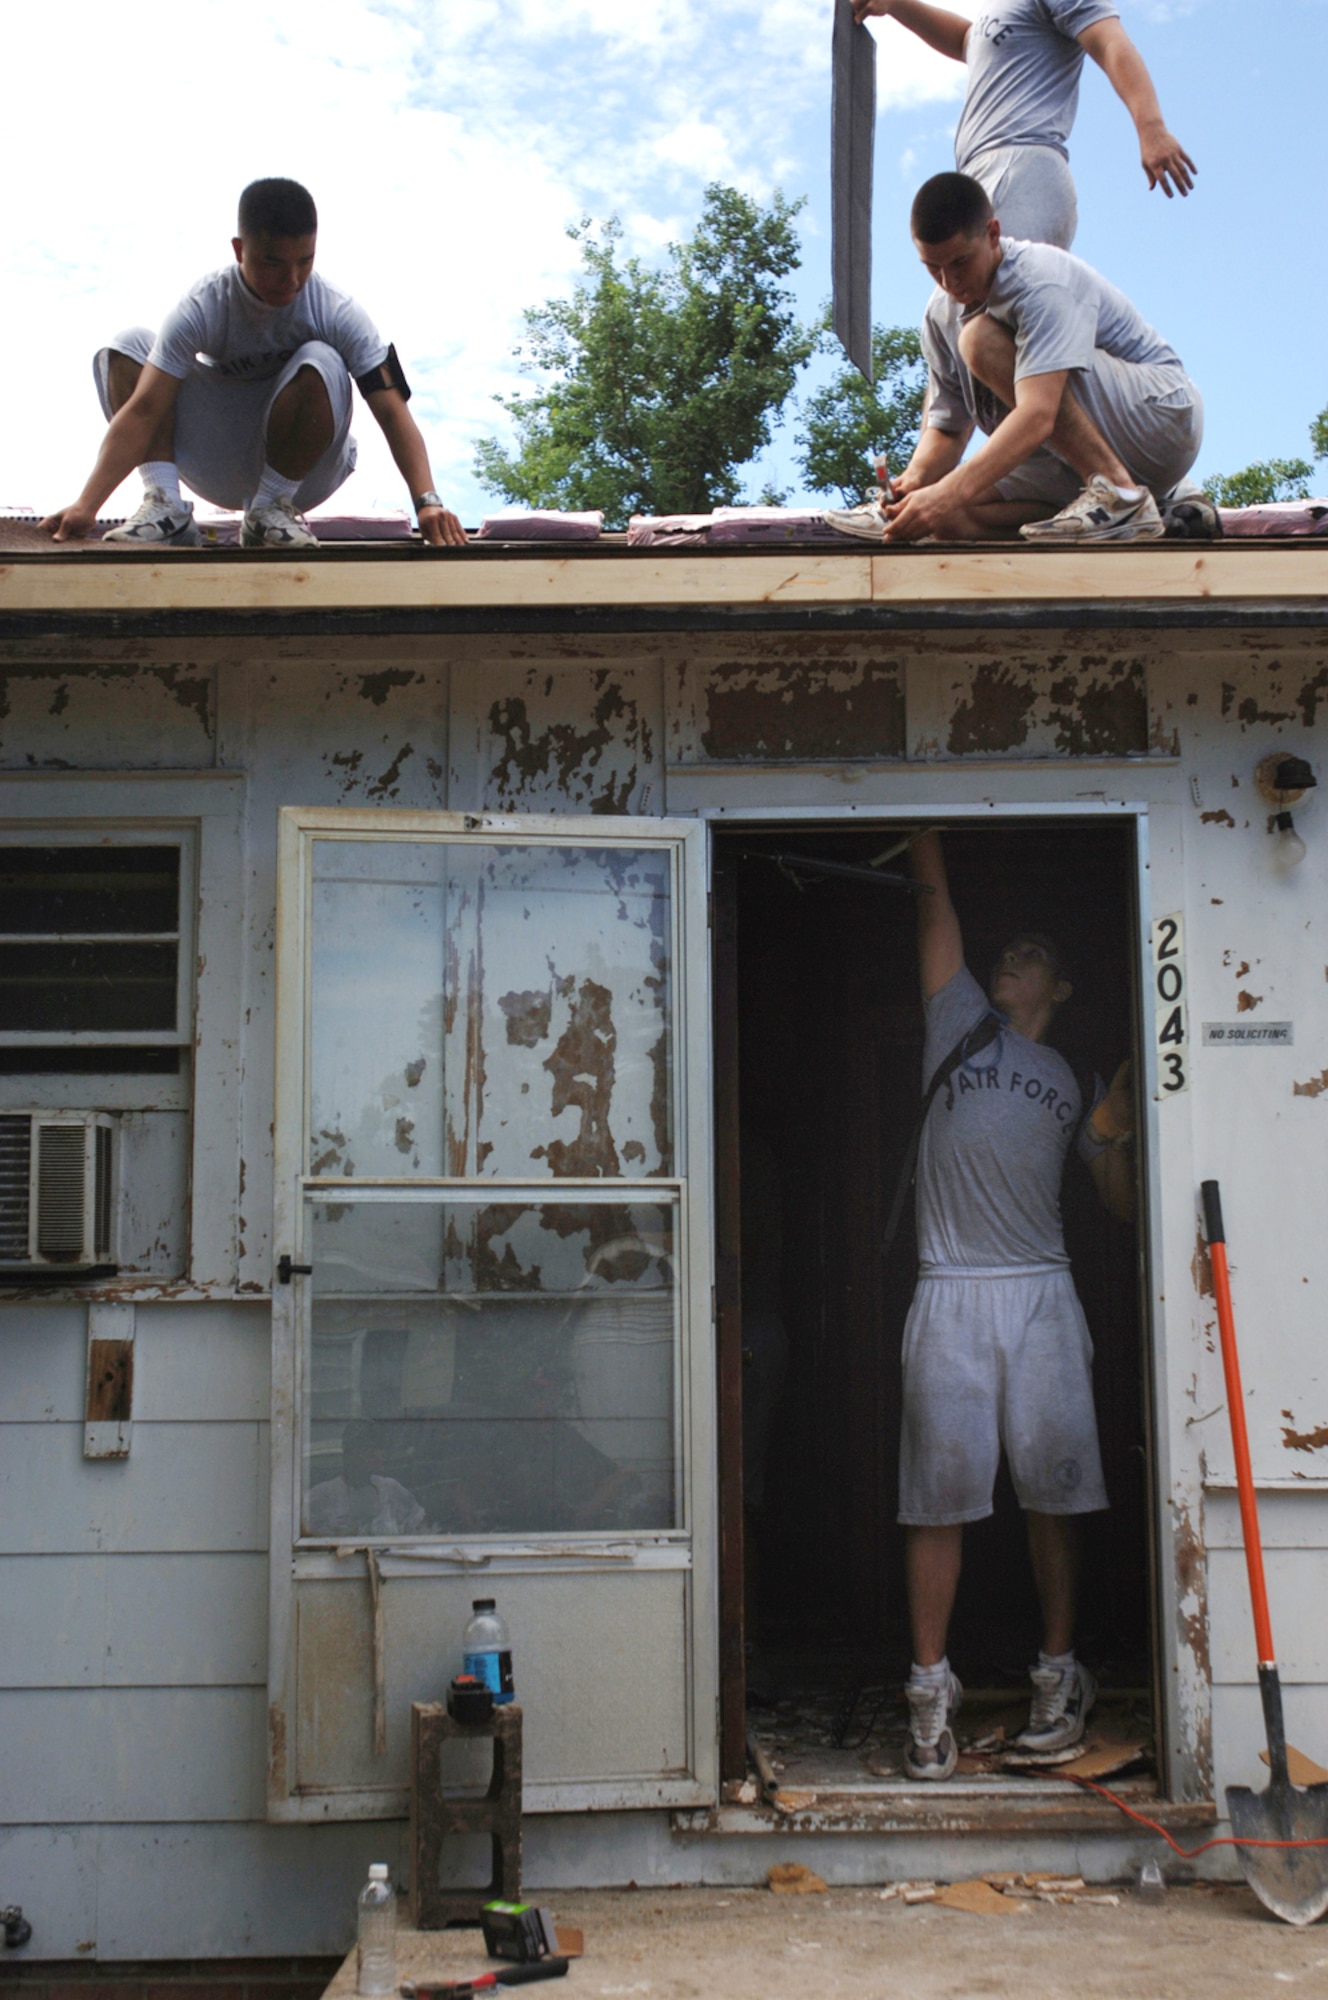 Trainees from Keesler Air Force Base, Miss., help repair a water-damaged roof in a house in Biloxi, Miss., Aug. 25. The civilian's house was heavily damaged by Hurricane Katrina one year ago. The Airmen are with the 332nd Training Squadron at Keesler AFB. (U.S. Air Force photo/Tech. Sgt. Cecilio Ricardo Jr.)